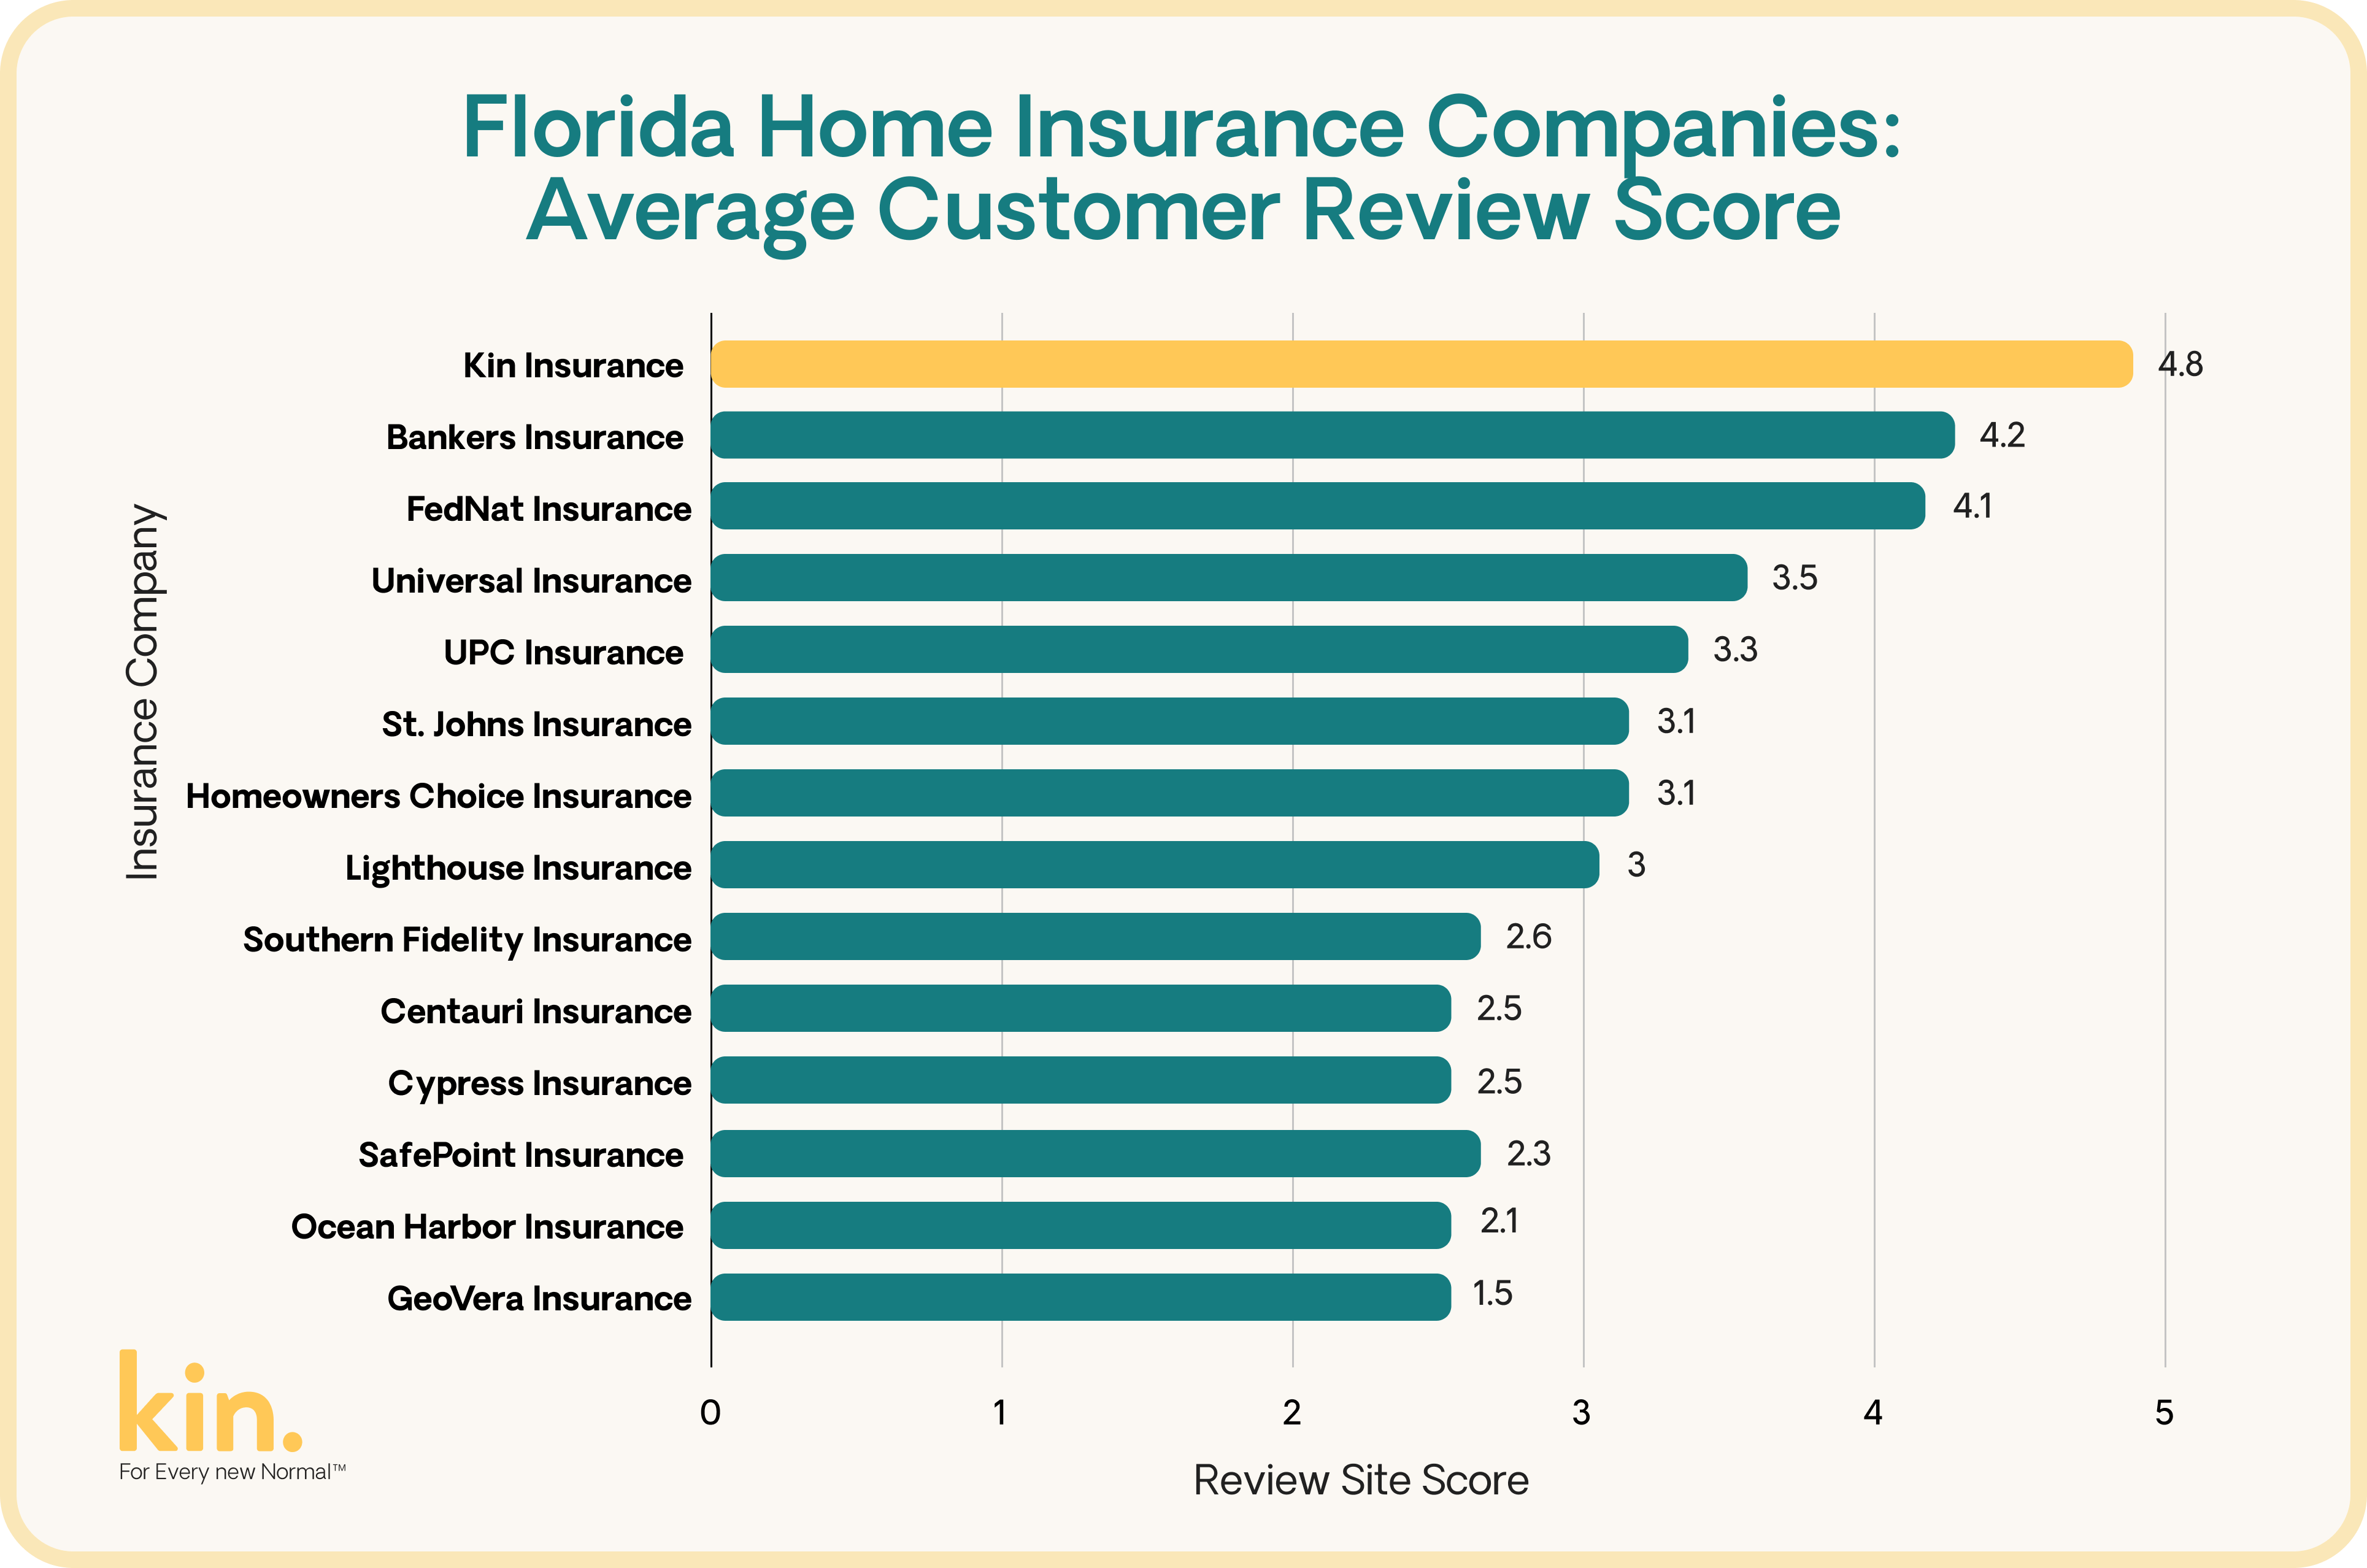 Bar chart comparing the average online customer review scores of Kin and several of its competitors. Scores are all out of a possible five. The average score for Kin is 4.8; for Bankers Insurance, 4.2; for FedNat Insurance, 4.1; for Universal Property & Casualty, 3.5; for UPC Insurance, 3.3; for St Johns Insurance, 3.1; for Homeowners Choice Insurance, 3.1; for Lighthouse Insurance, 3.0; for Southern Fidelity; 2.6; for Centauri Insurance, 2.5; for Cypress Insurance, 2.5; for SafePoint Insurance, 2.3; for Ocean Harbor Insurance, 2.1, and for GeoVera Insurance, 1.5.